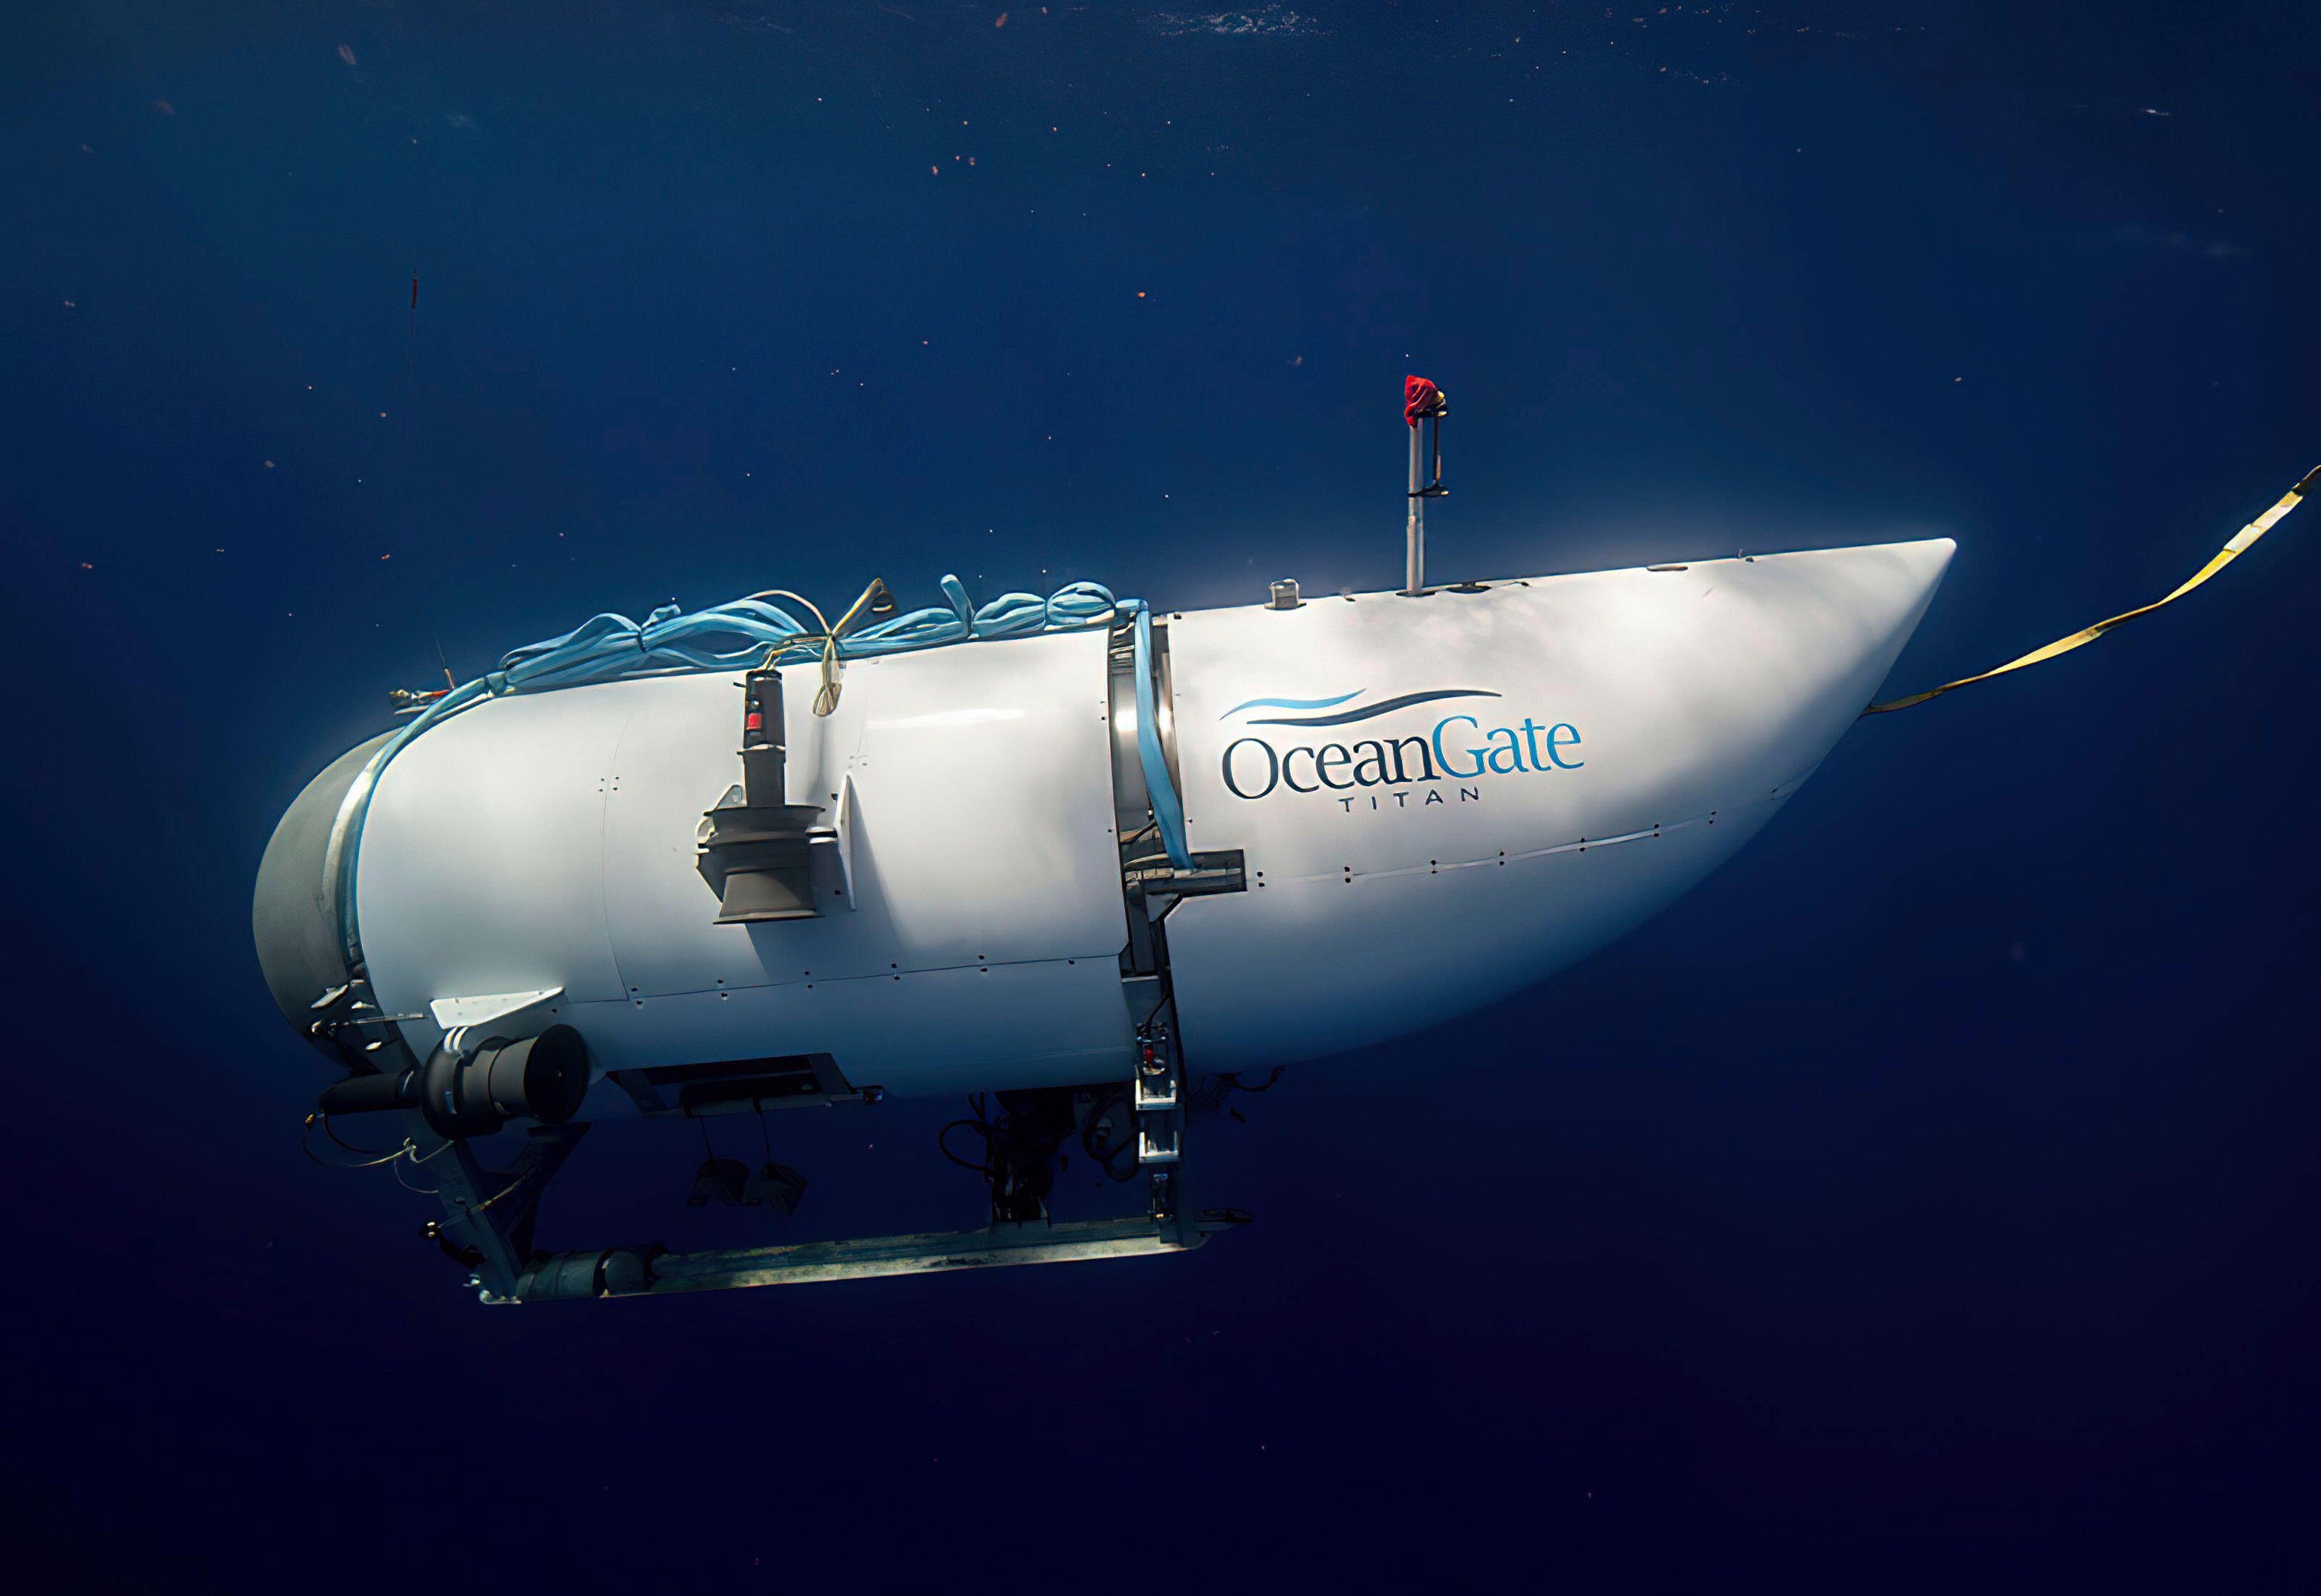 This photo provided by OceanGate Expeditions shows the submersible vessel named Titan used to visit the wreckage site of the Titanic.